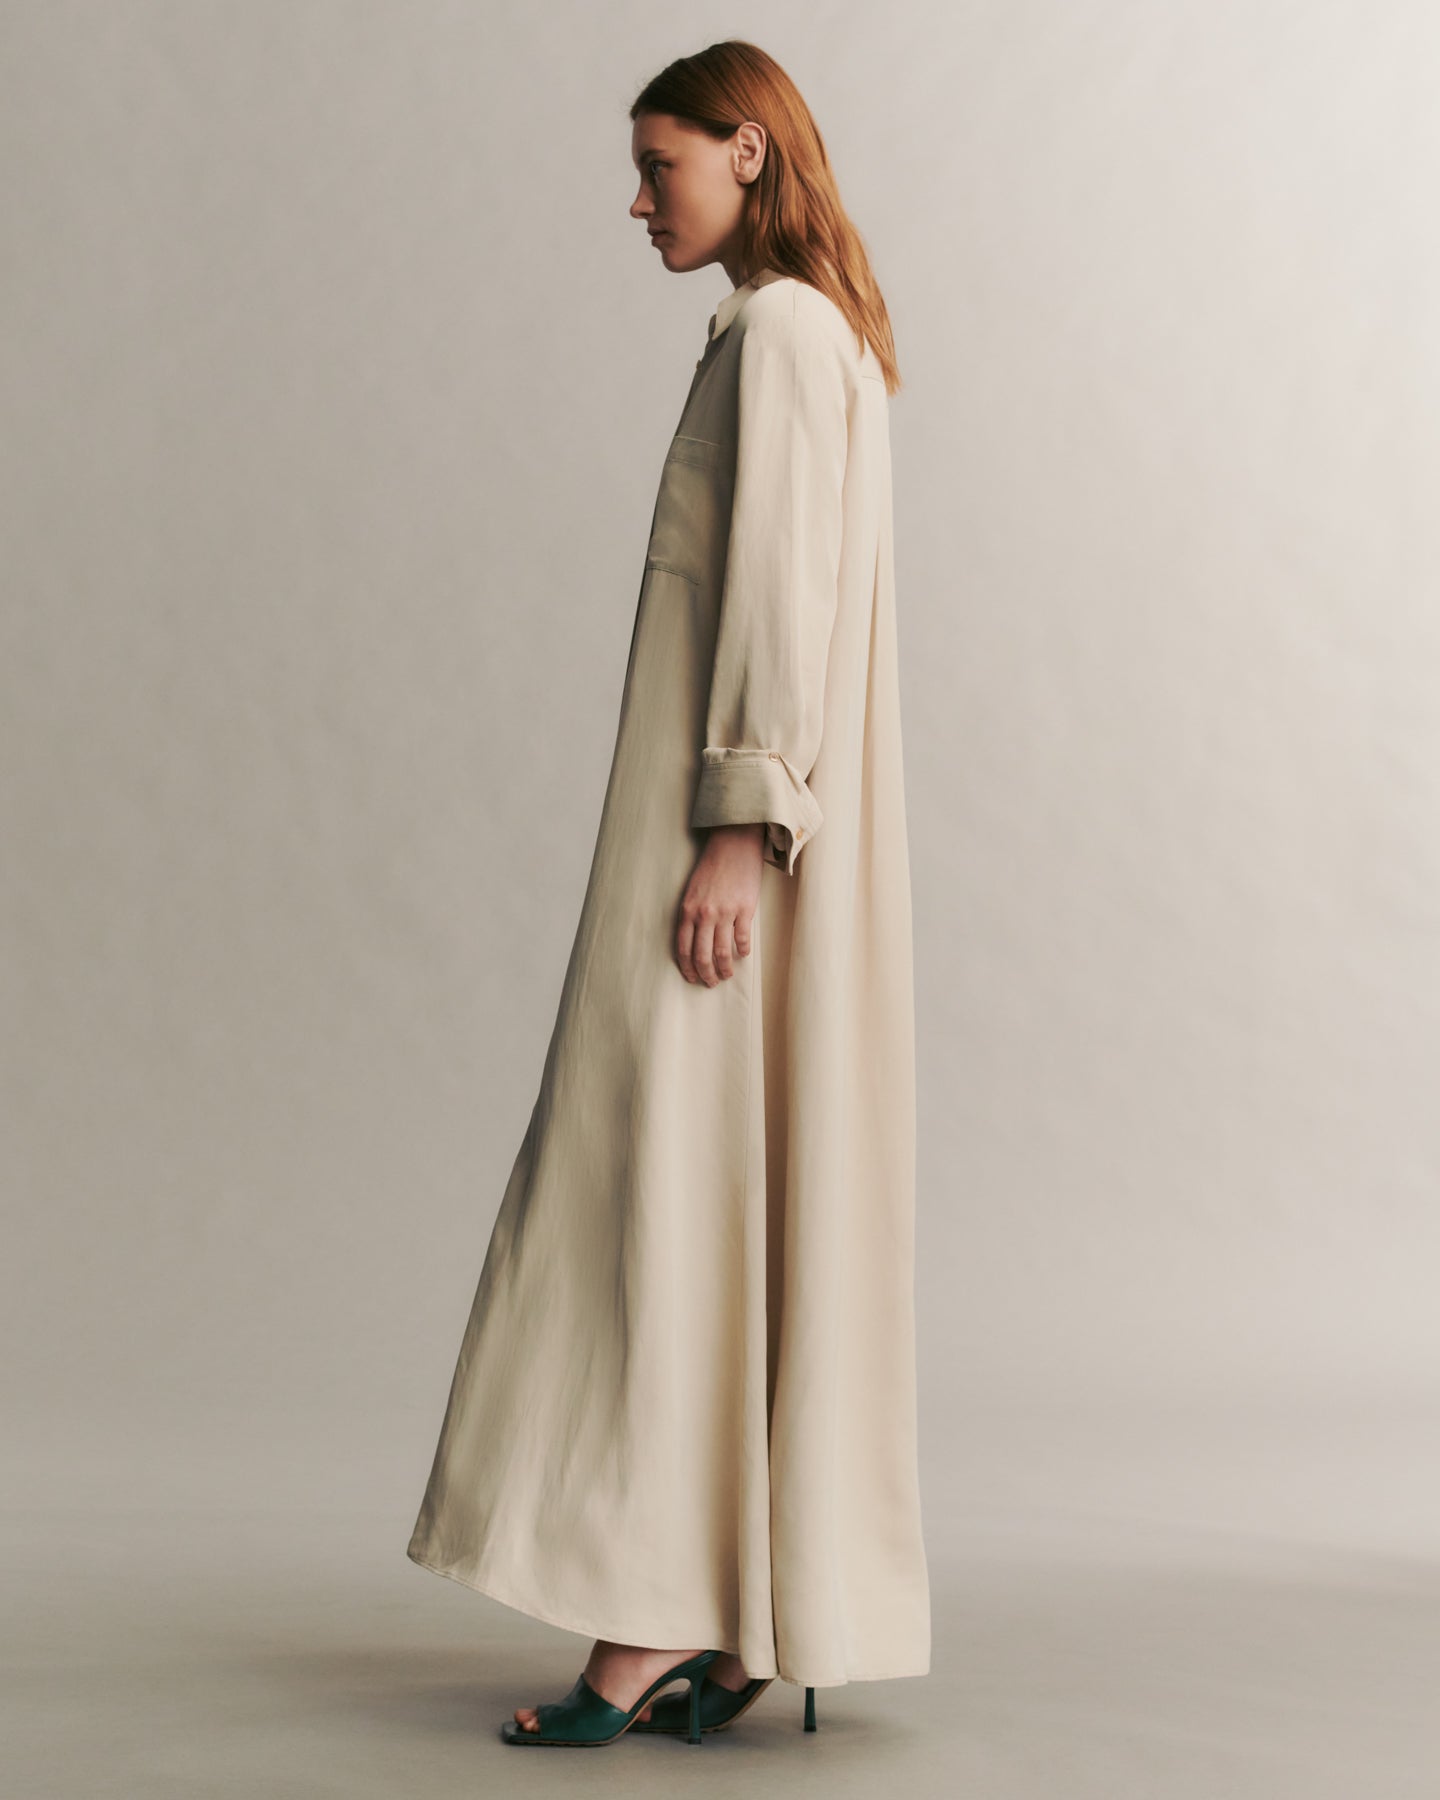 TWP French oak Jennys Gown in Coated Viscose Linen view 3